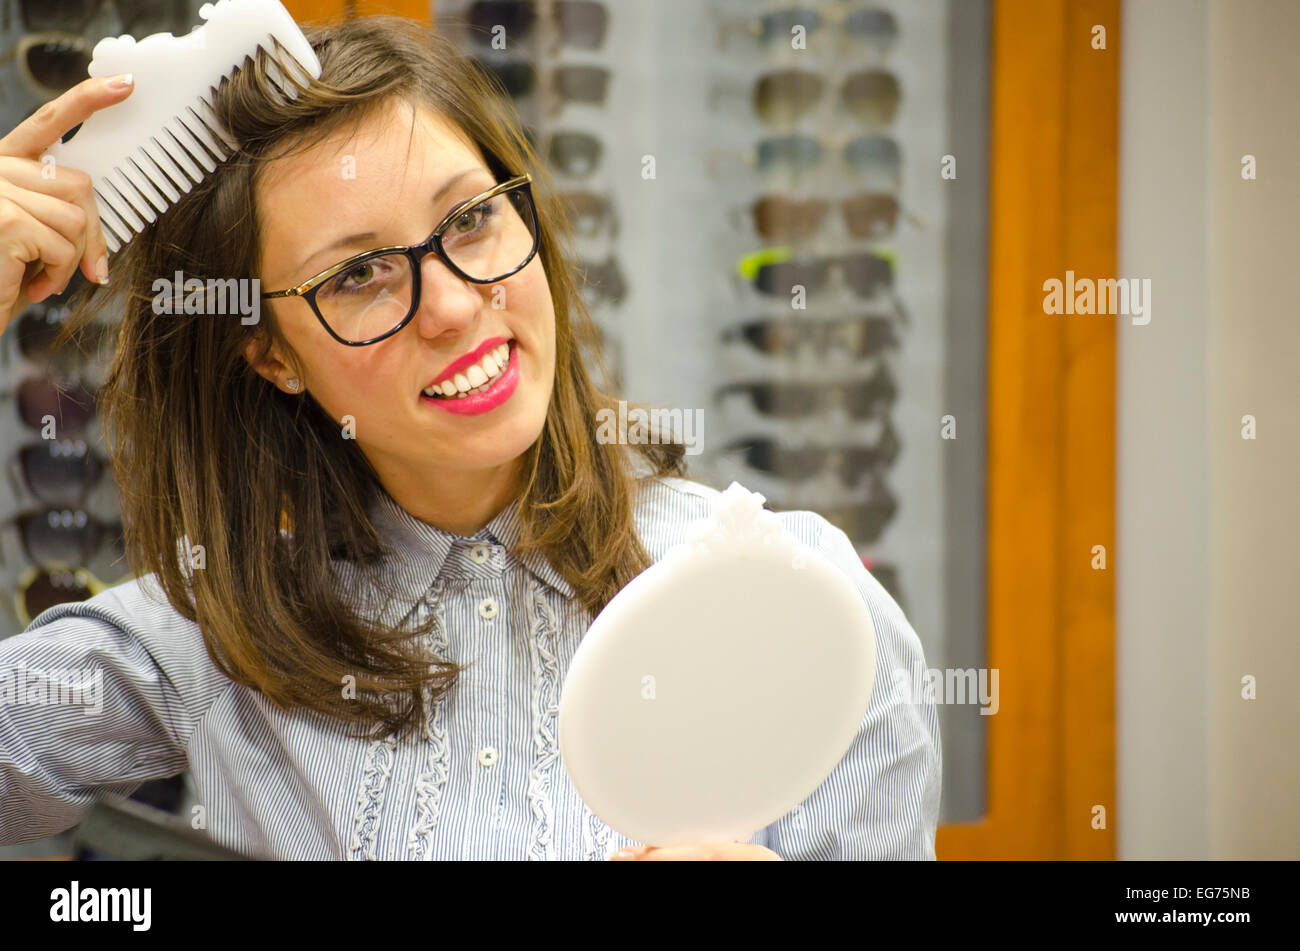 Young brunette trying red glasses at the optics store with different frames in the background Stock Photo